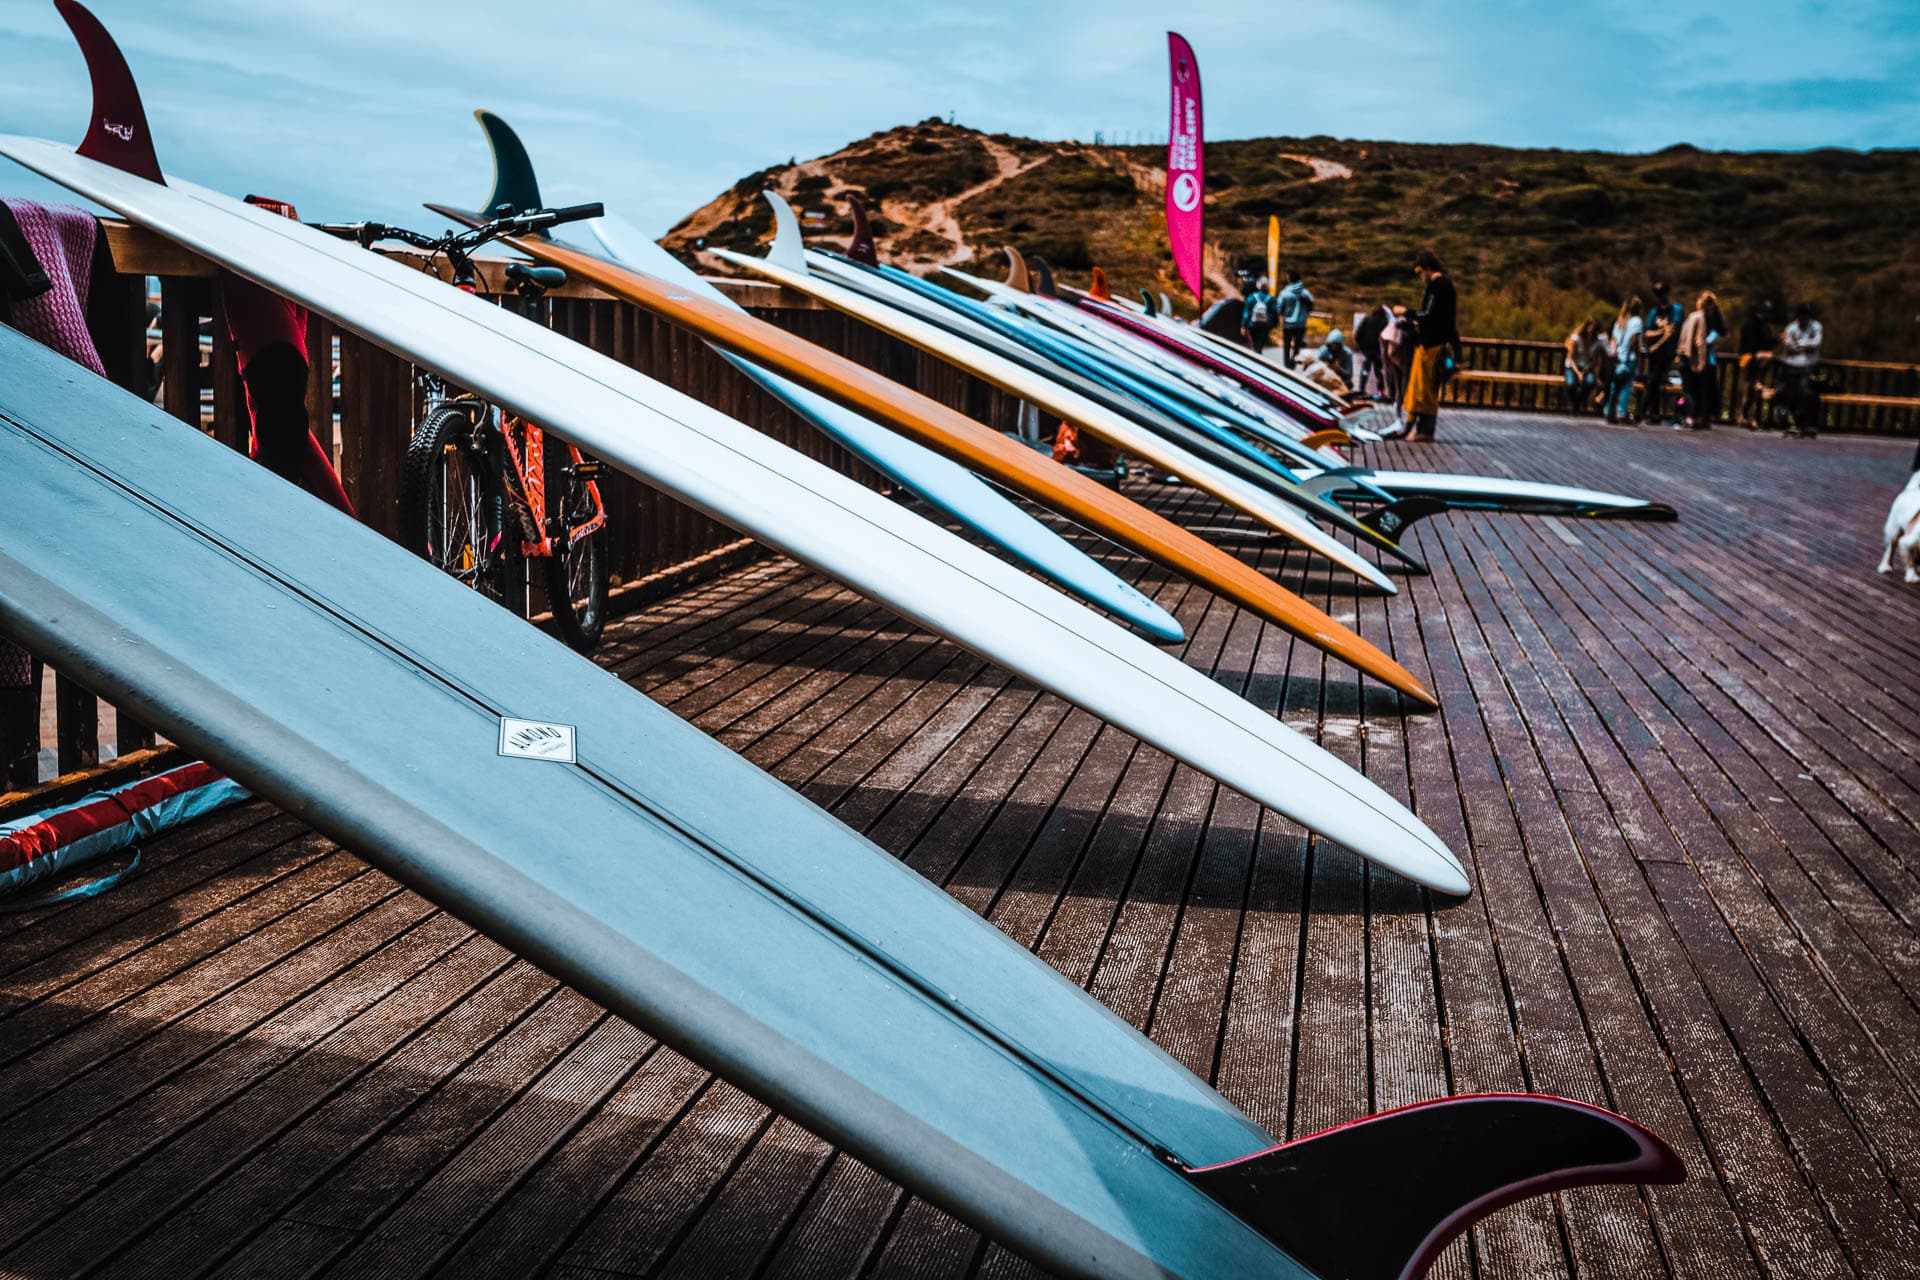 Surfboards lined up on a deck